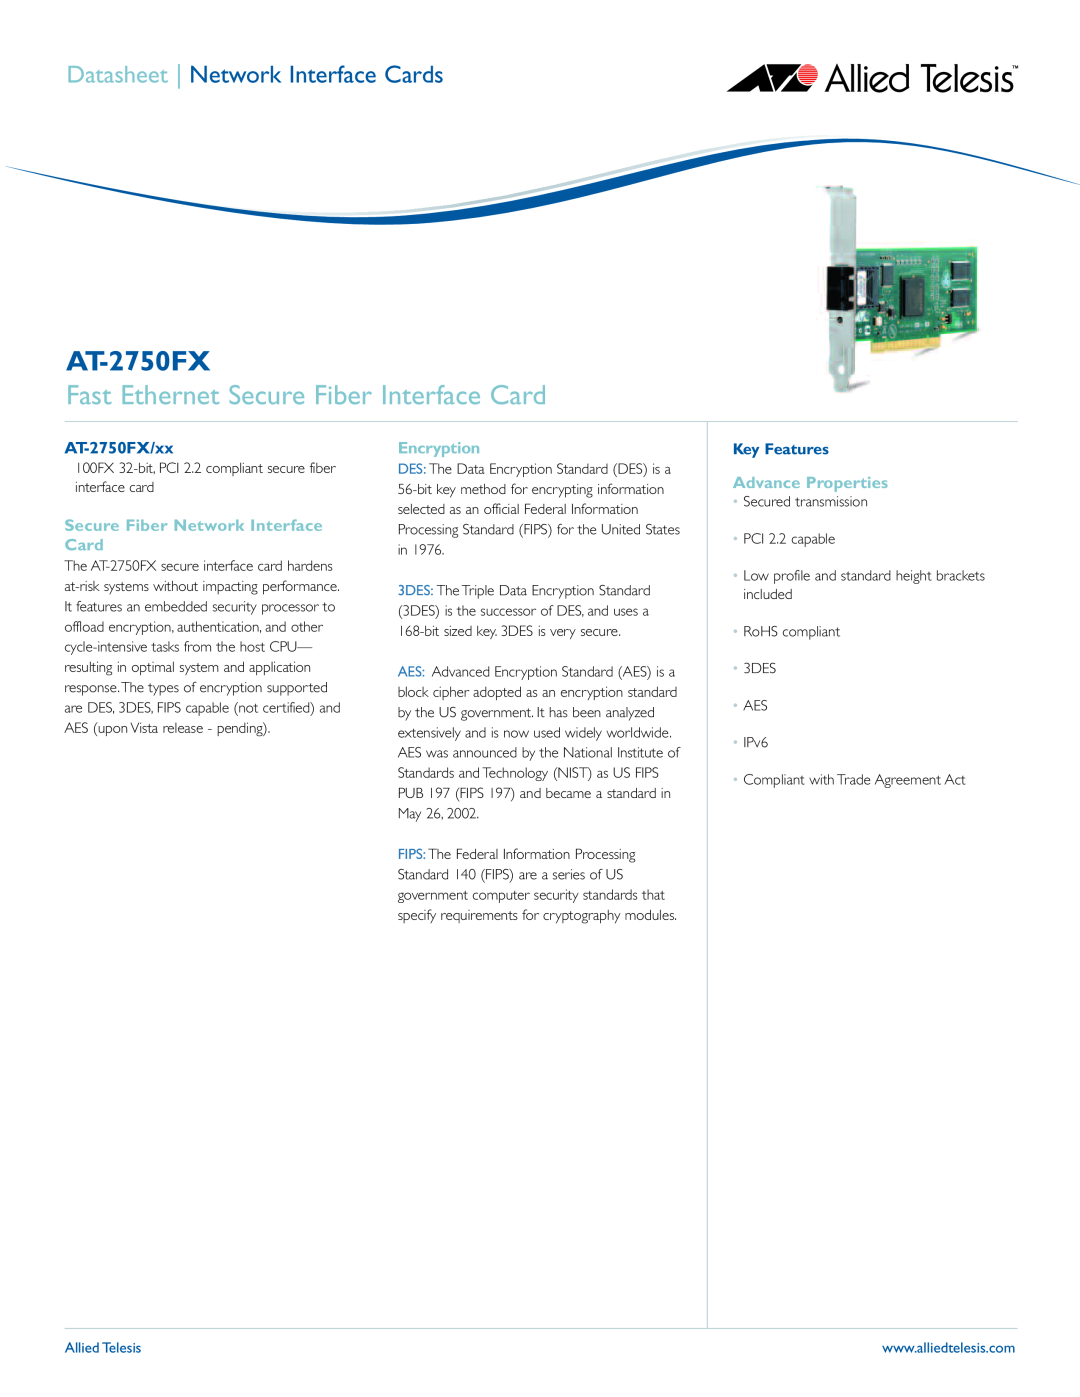 Allied Telesis manual Fast Ethernet Secure Fiber Interface Card, AT-2750FX/xx, Secure Fiber Network Interface Card 